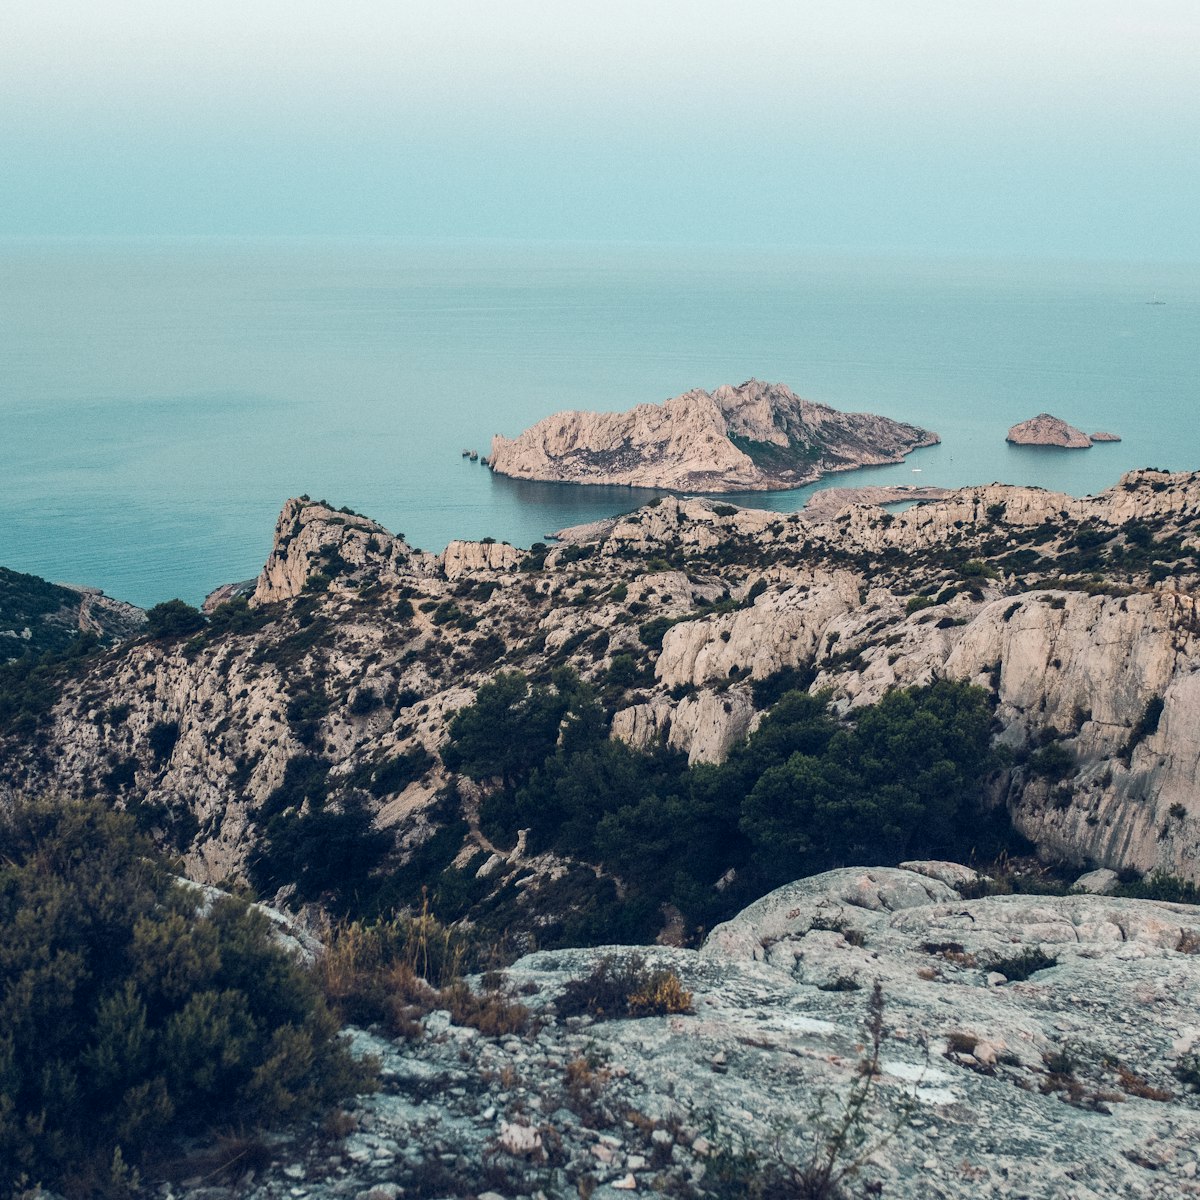 Calanques National Park at dawn, view over the city of Marseille.